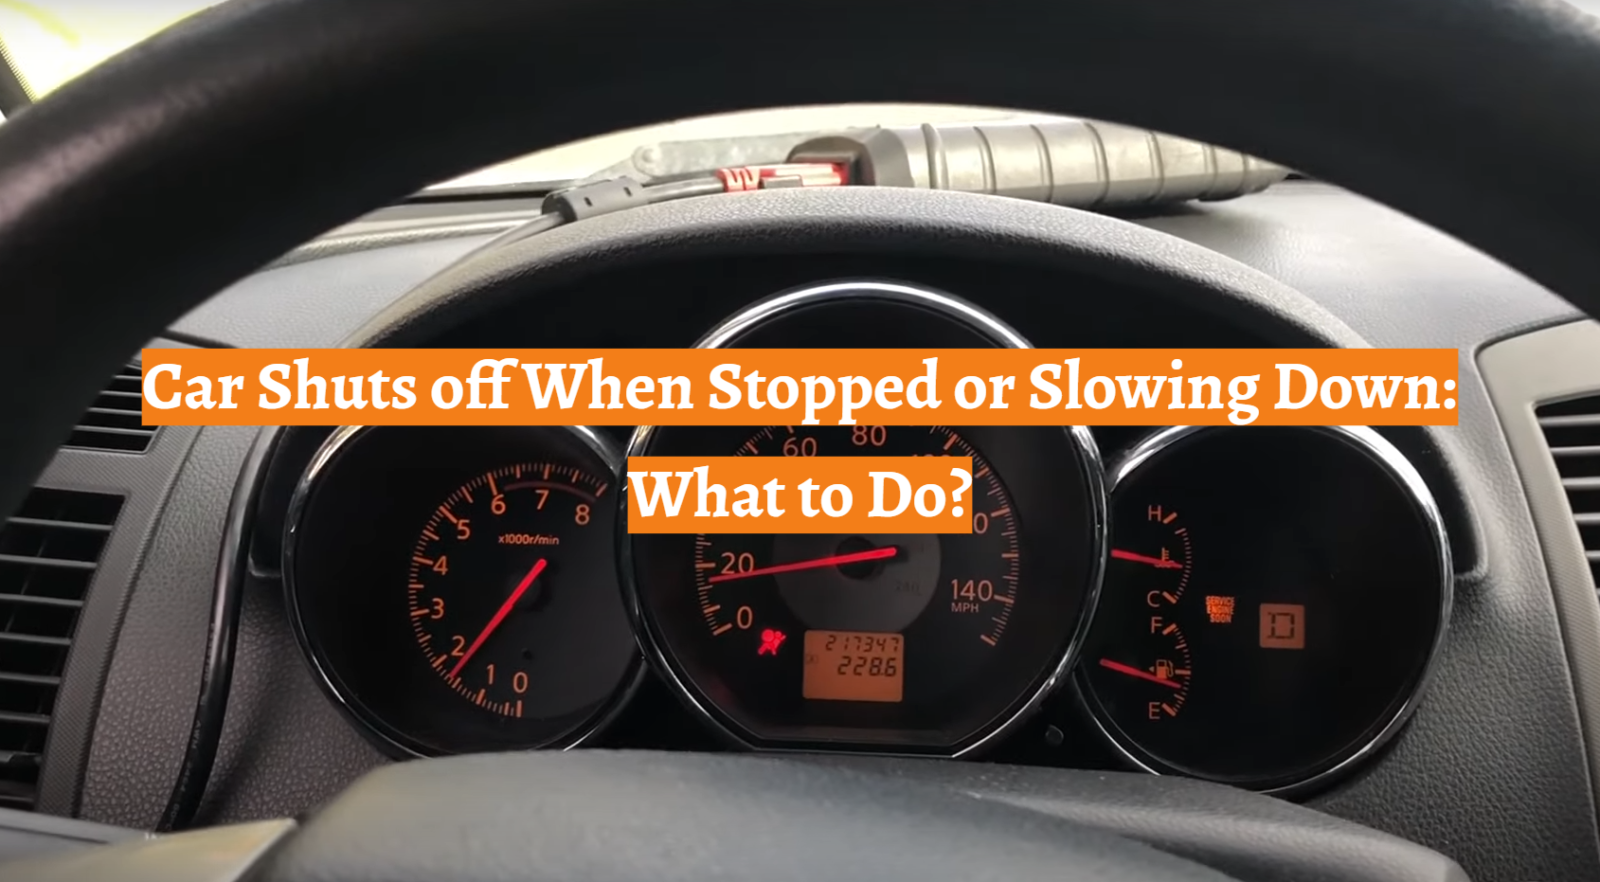 Car Shuts off When Stopped or Slowing Down: What to Do?